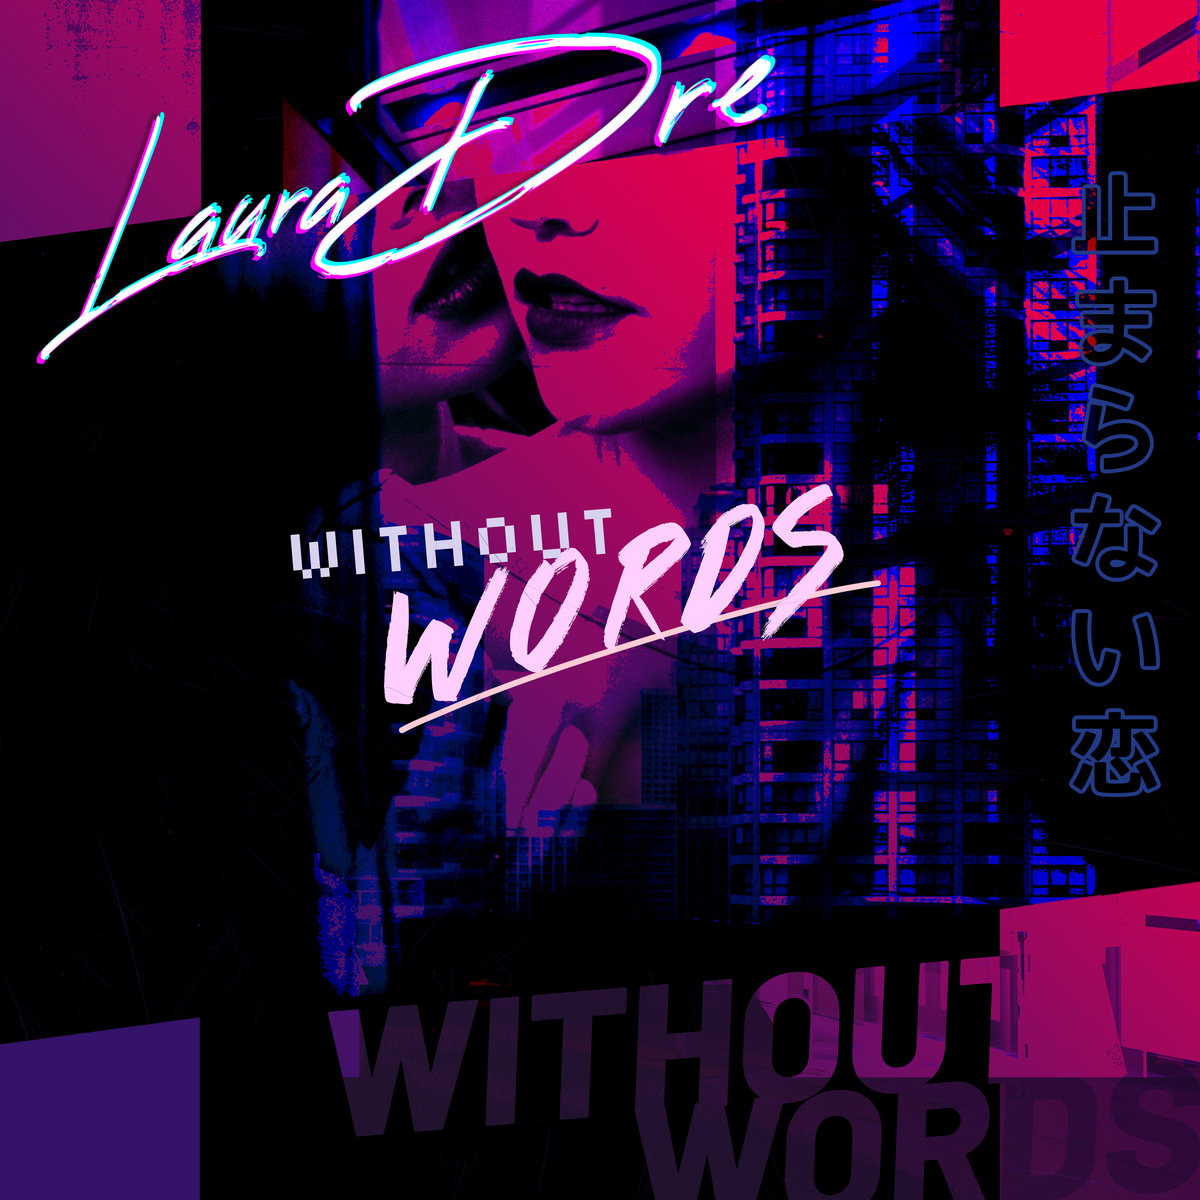 a2349784214 10 - Laura Dre drops ‘Without Words’